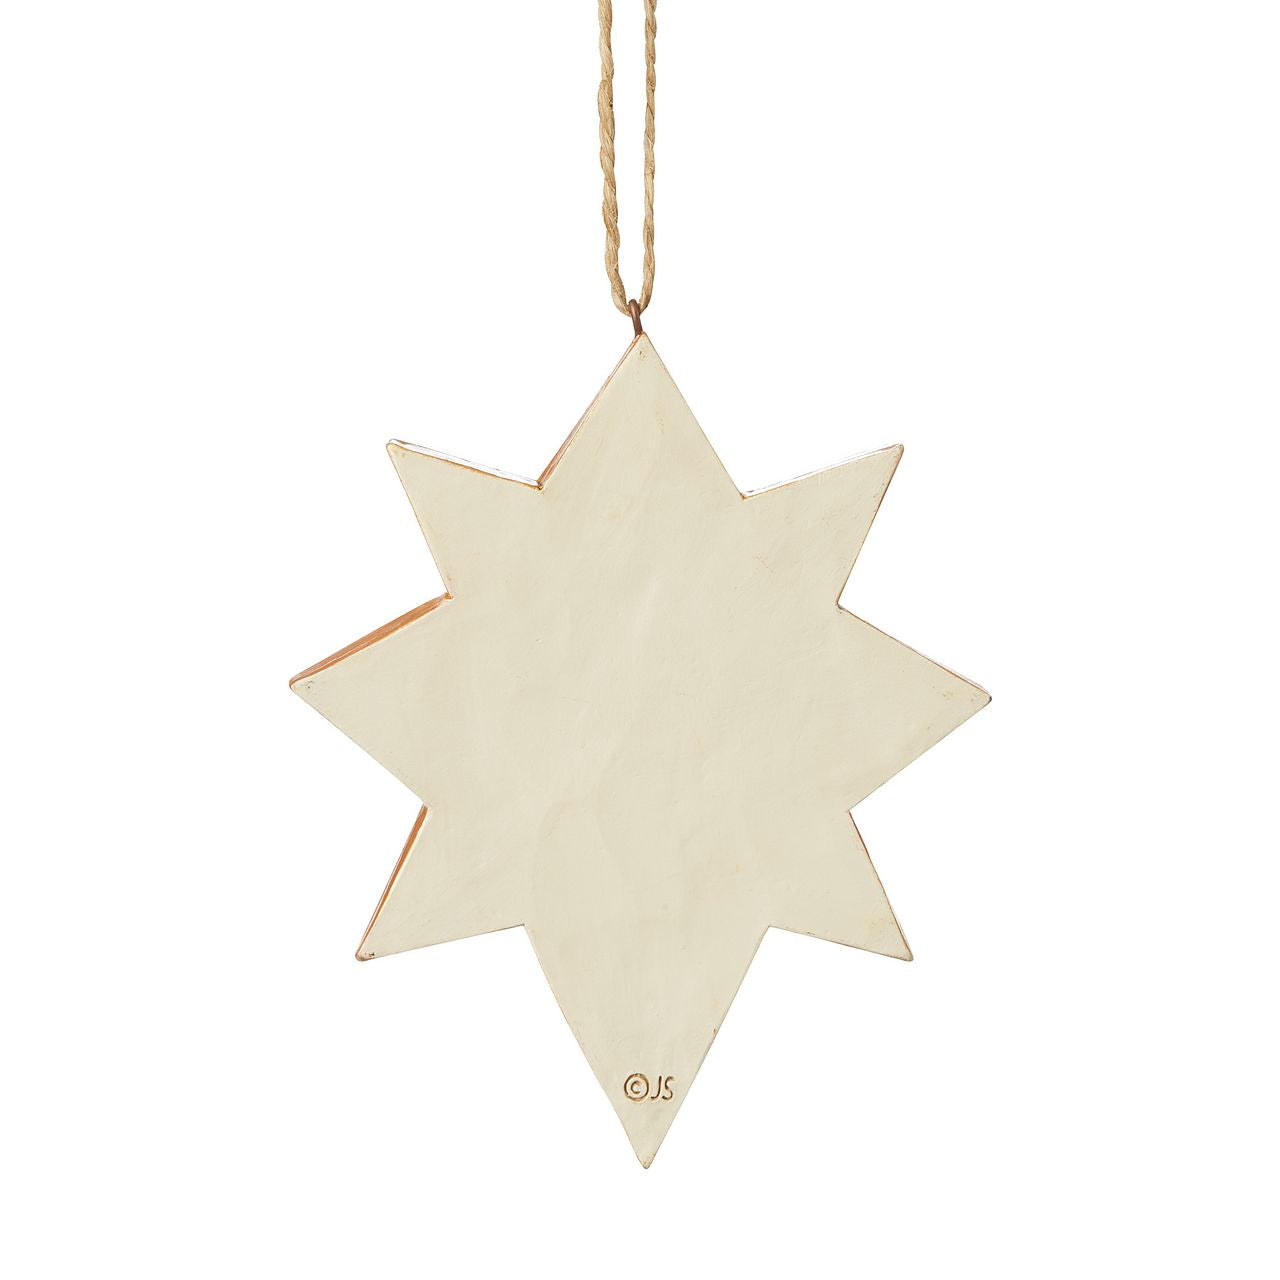 Jim Shore Black and Gold Nativity Star Hanging Ornament  Jim Shore's stunning Black & Gold collection features unmistakable style finished with striking, contrasting colour. This beautiful Nativity ornament design details the timeless story at the heart of Christmas.